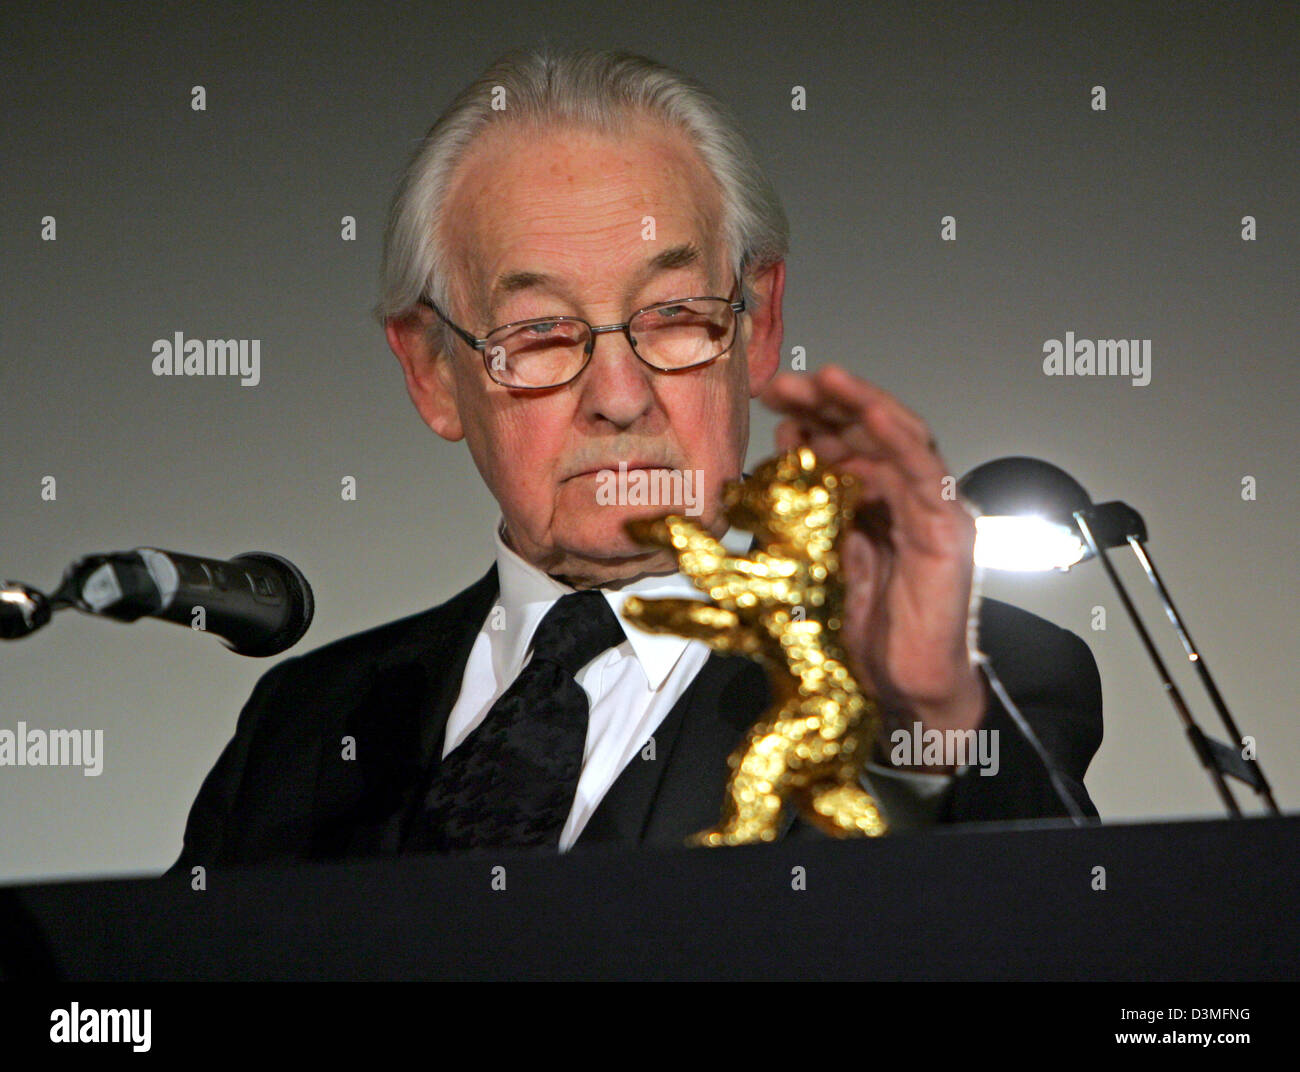 Polish director Andrzej Wajda is pleased about being awarded the Honory Golden Bear for his lifetime achivement at the 56th International Film festival in Berlin, Germany, 15 February 2006. Photo: Jens Kalaene Stock Photo